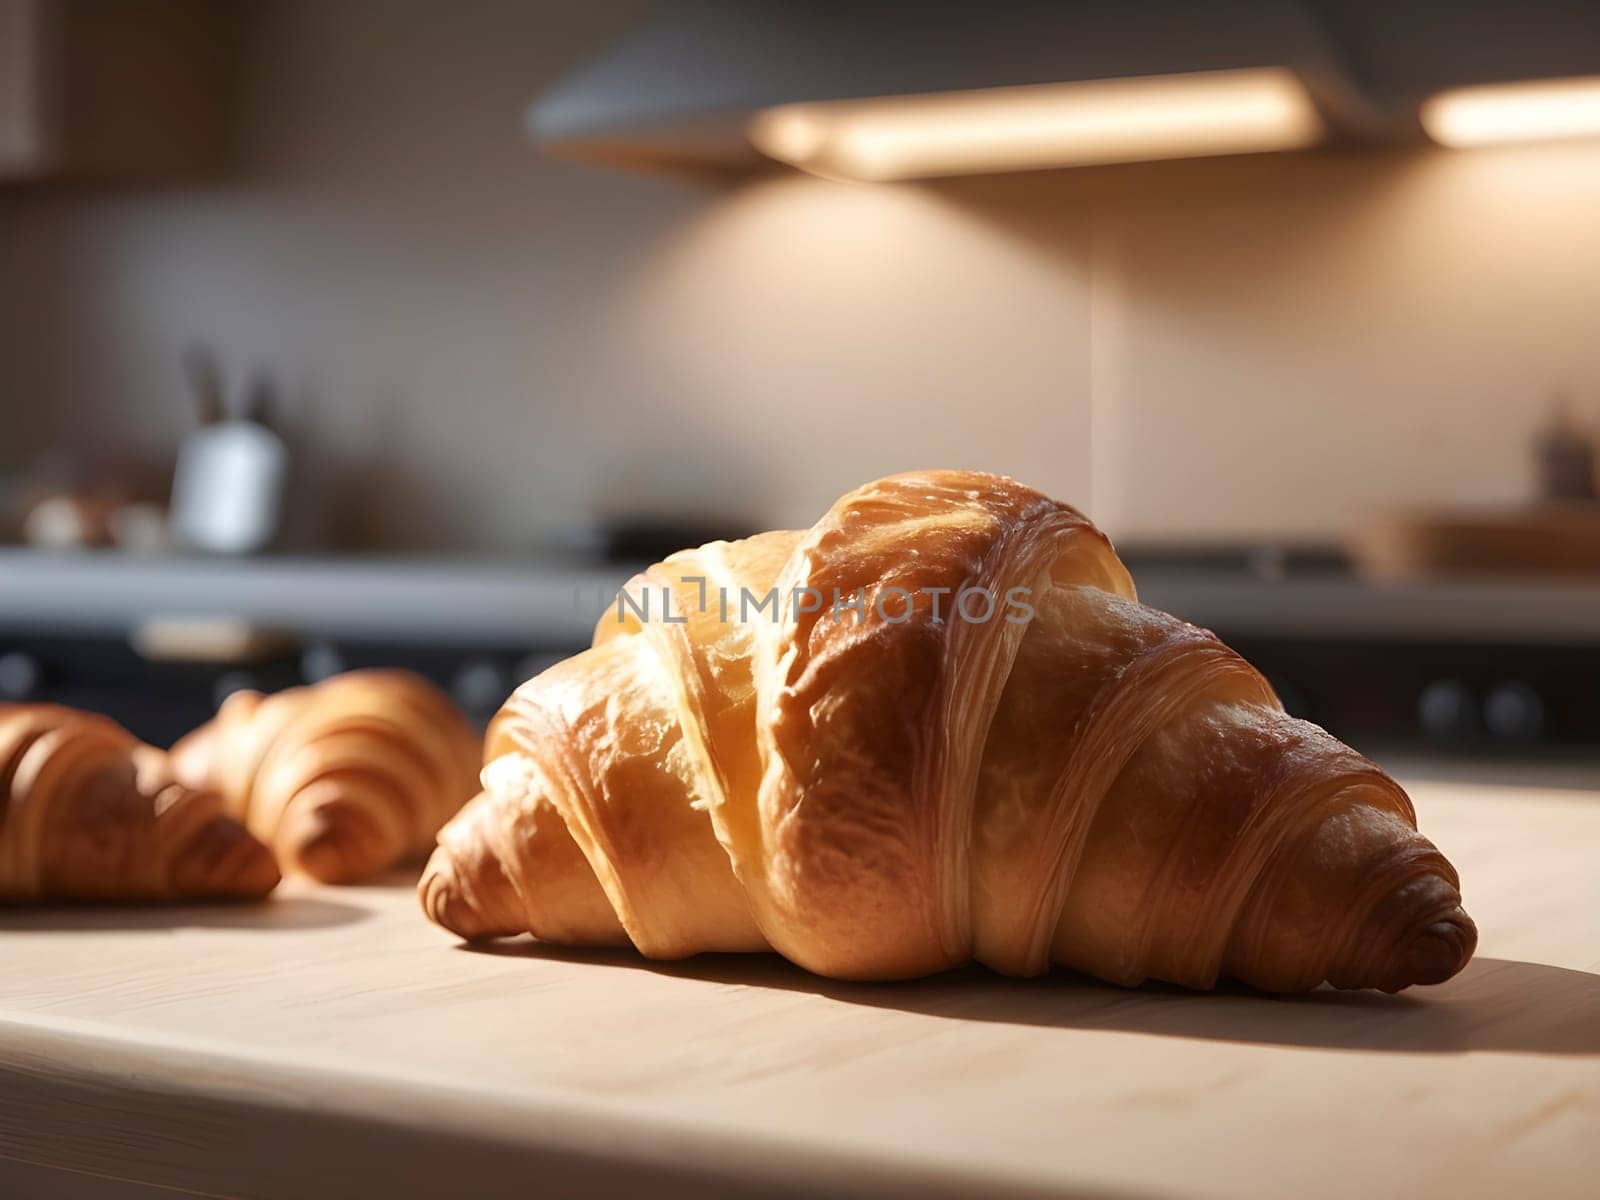 Afternoon Delight: Croissant Takes Center in a Cozy, Sunlit Kitchen Scene.